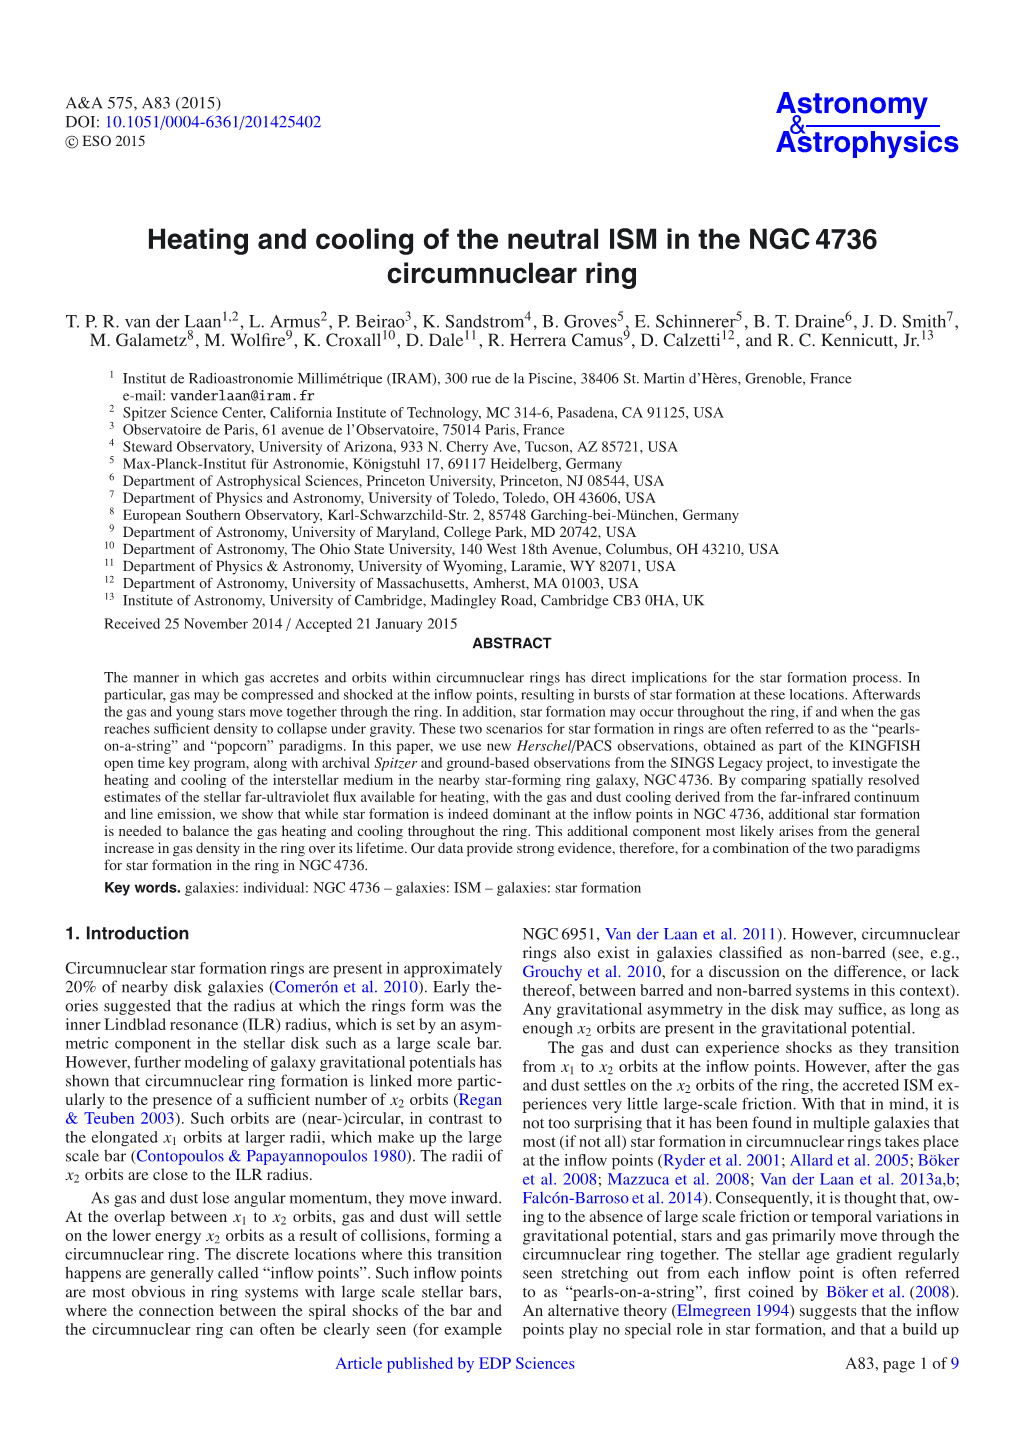 Heating and Cooling of the Neutral ISM in the NGC 4736 Circumnuclear Ring